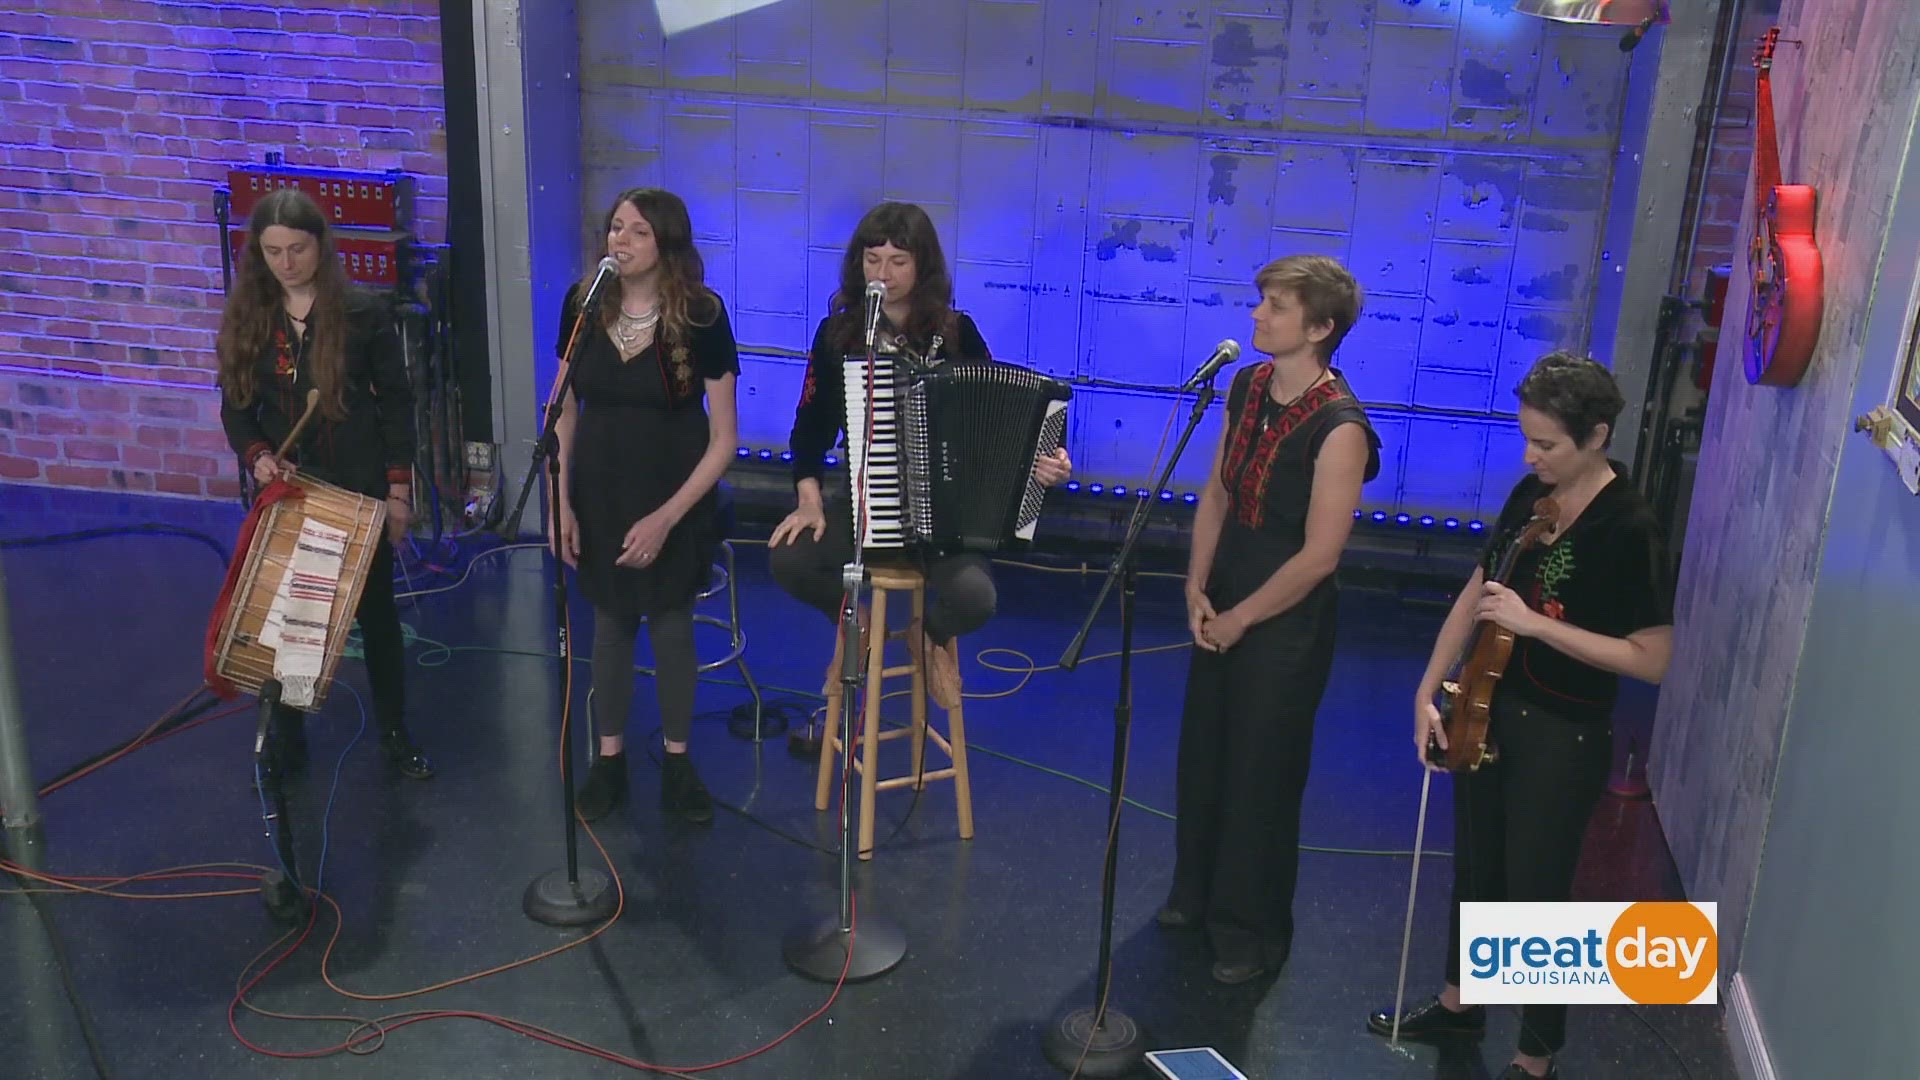 Blato Zlato stops by the Chip Forstall Sound Stage to talk about their first Jazz Fest performance and share some Bulgarian Folk Music.